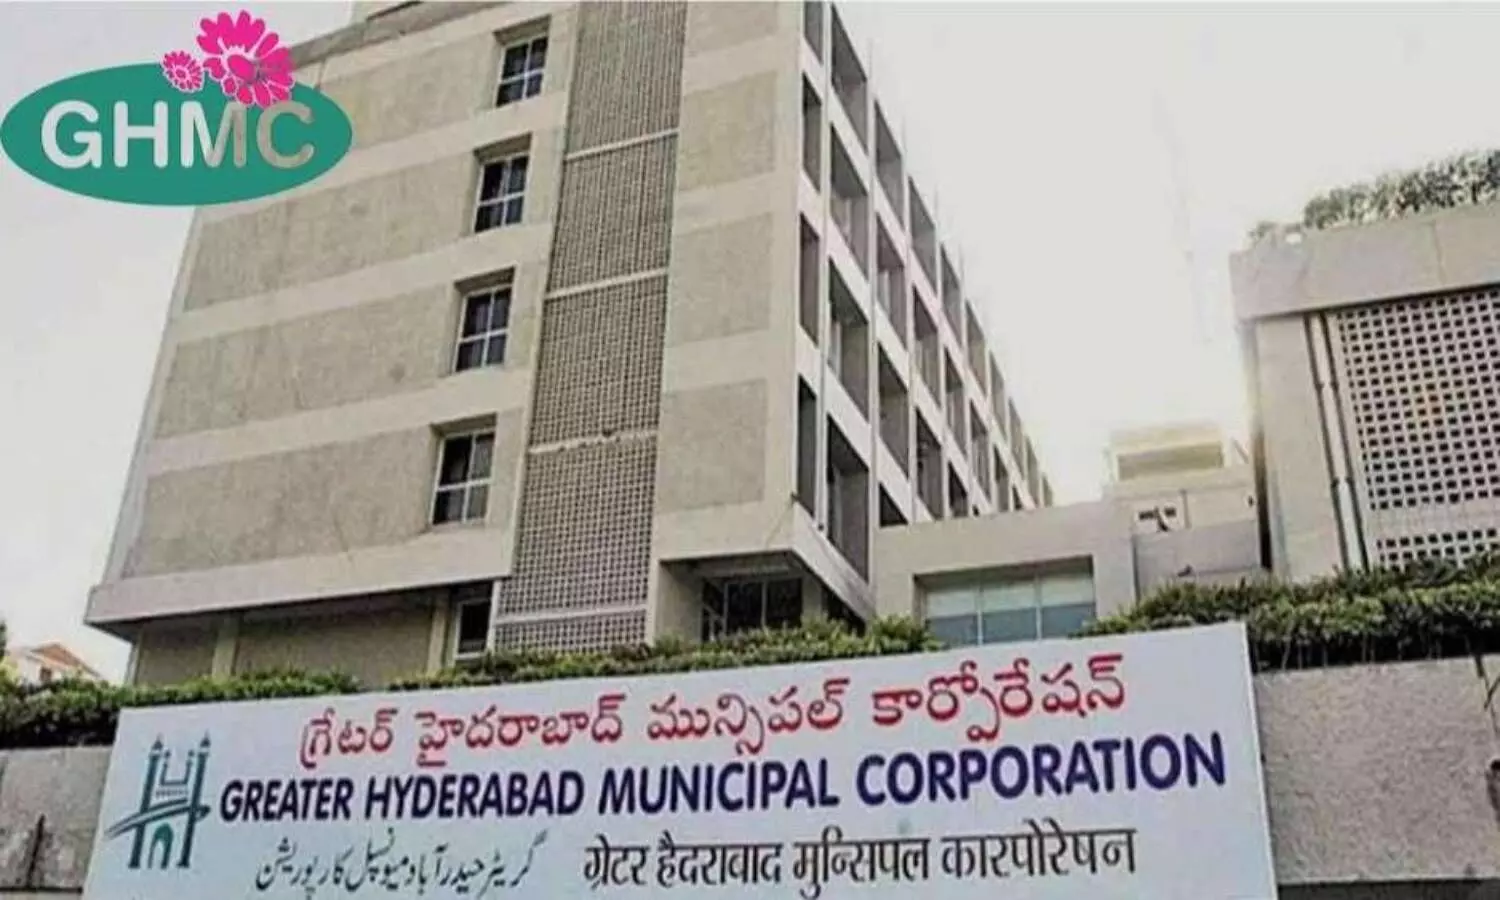 GHMC mayoral elections scheduled for 11 February